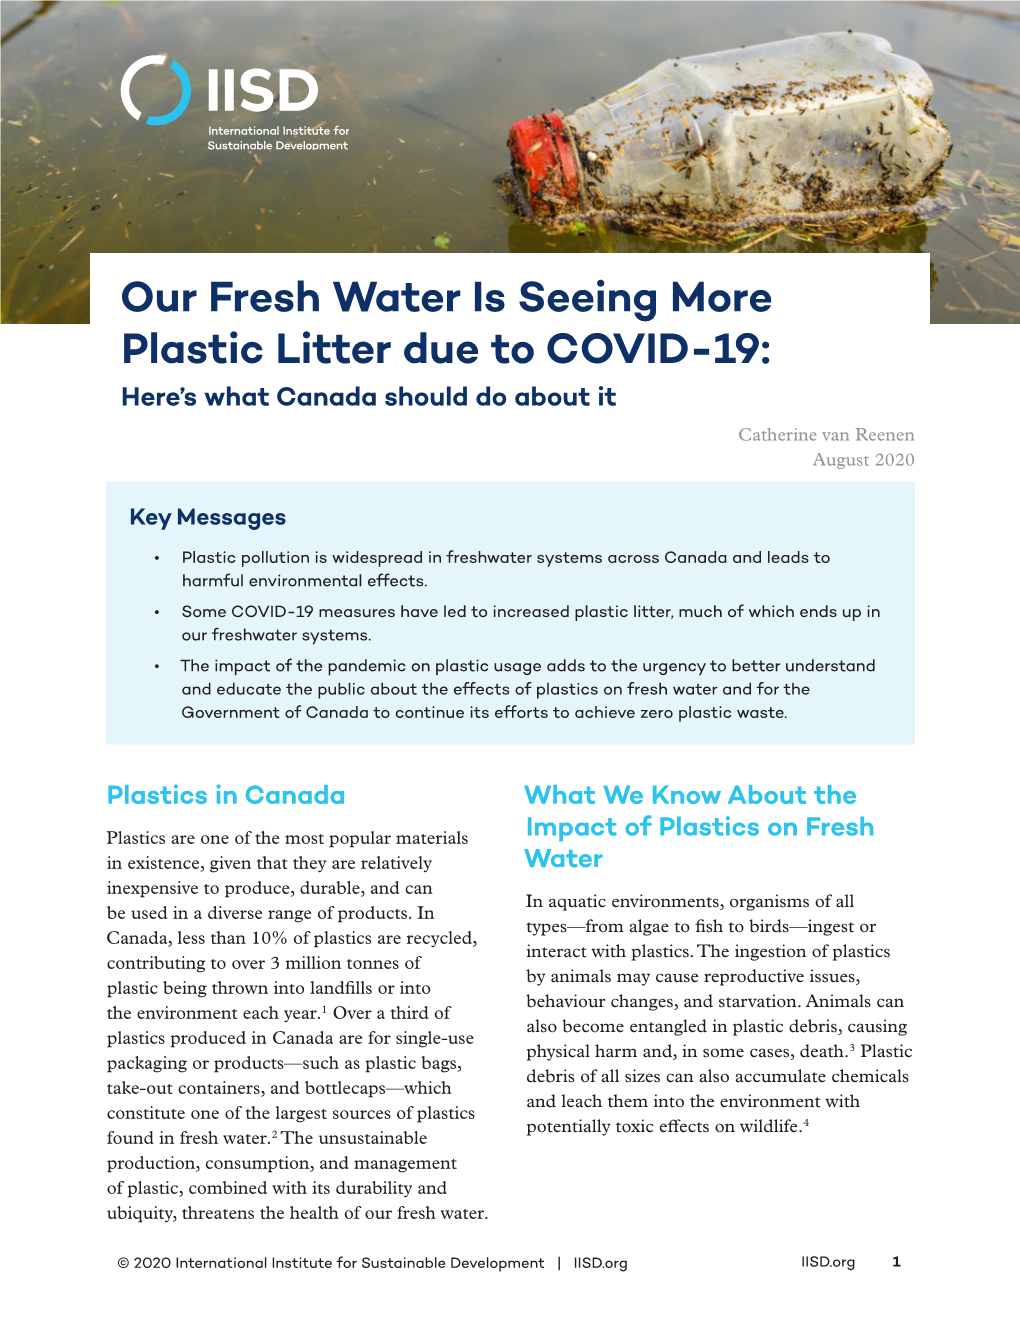 Our Fresh Water Is Seeing More Plastic Litter Due to COVID-19: Here’S What Canada Should Do About It Catherine Van Reenen August 2020